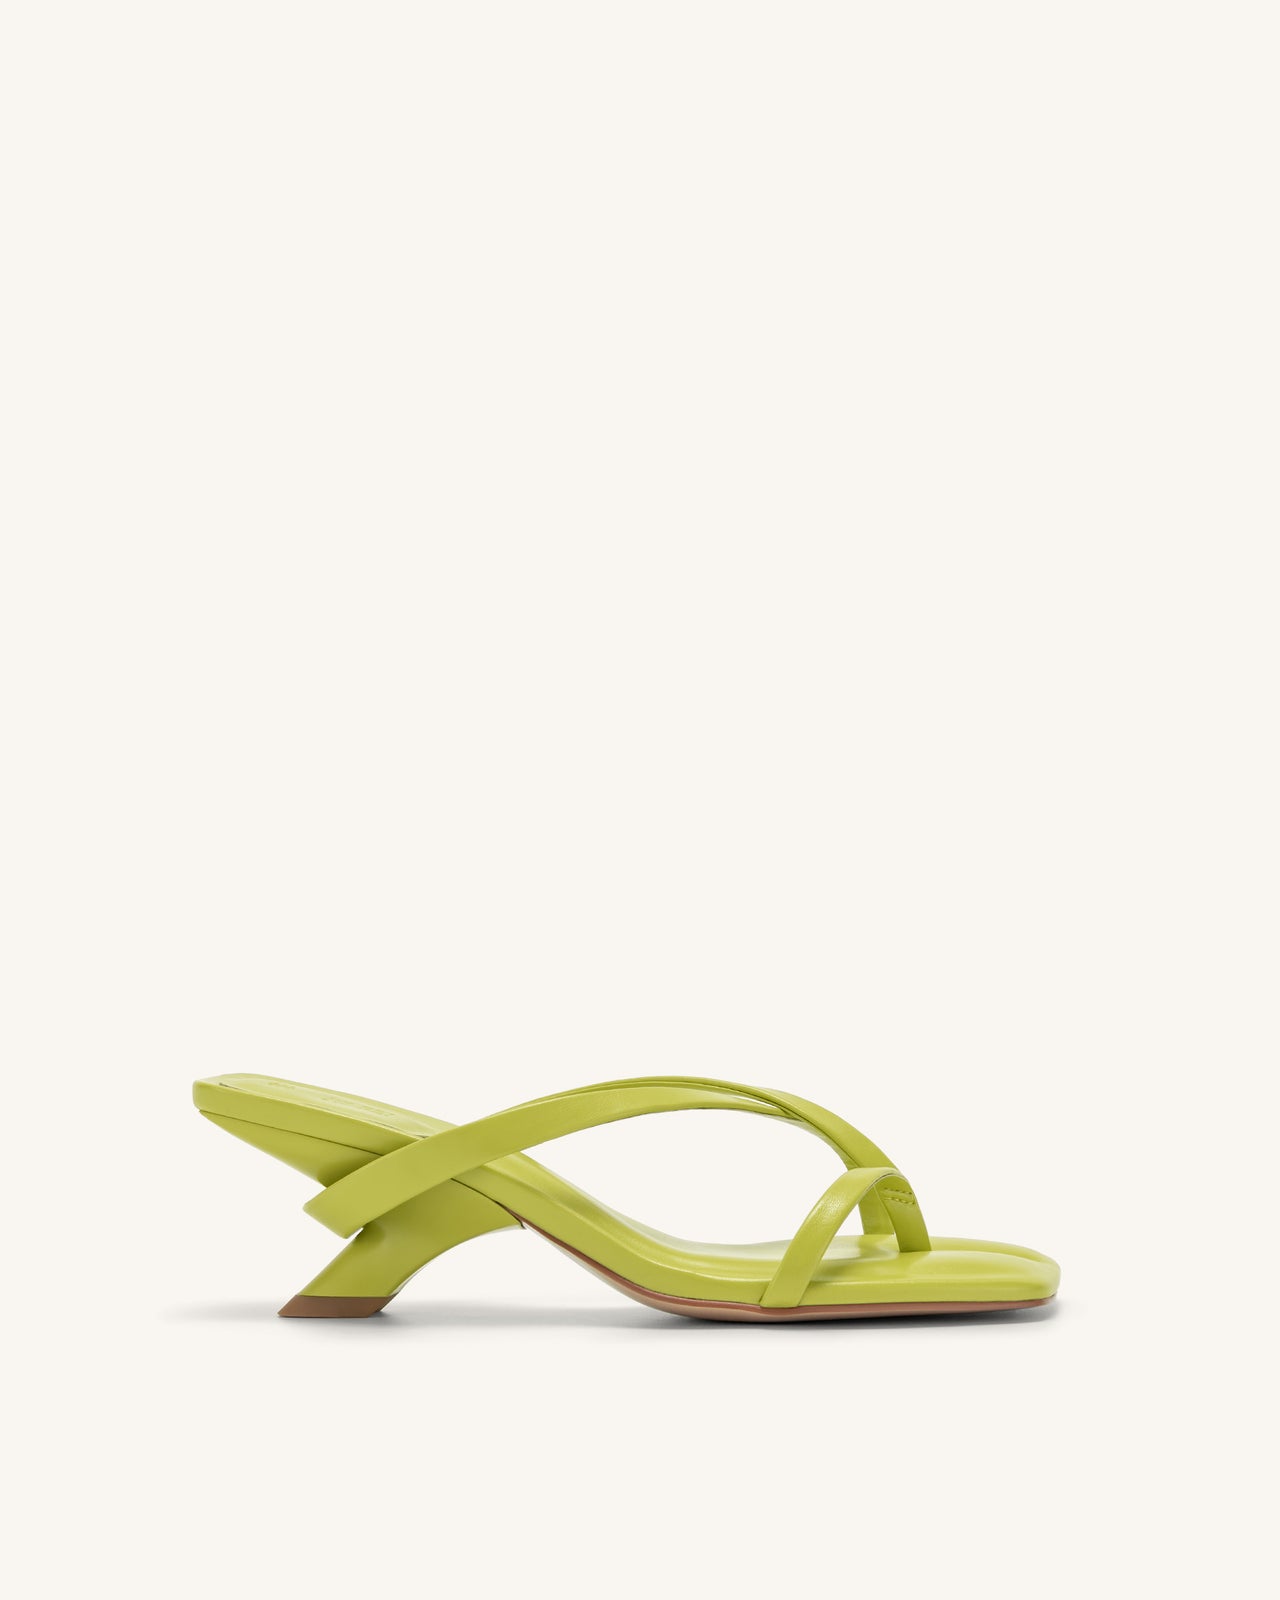 Maeve Strappy Mule - Lime Green